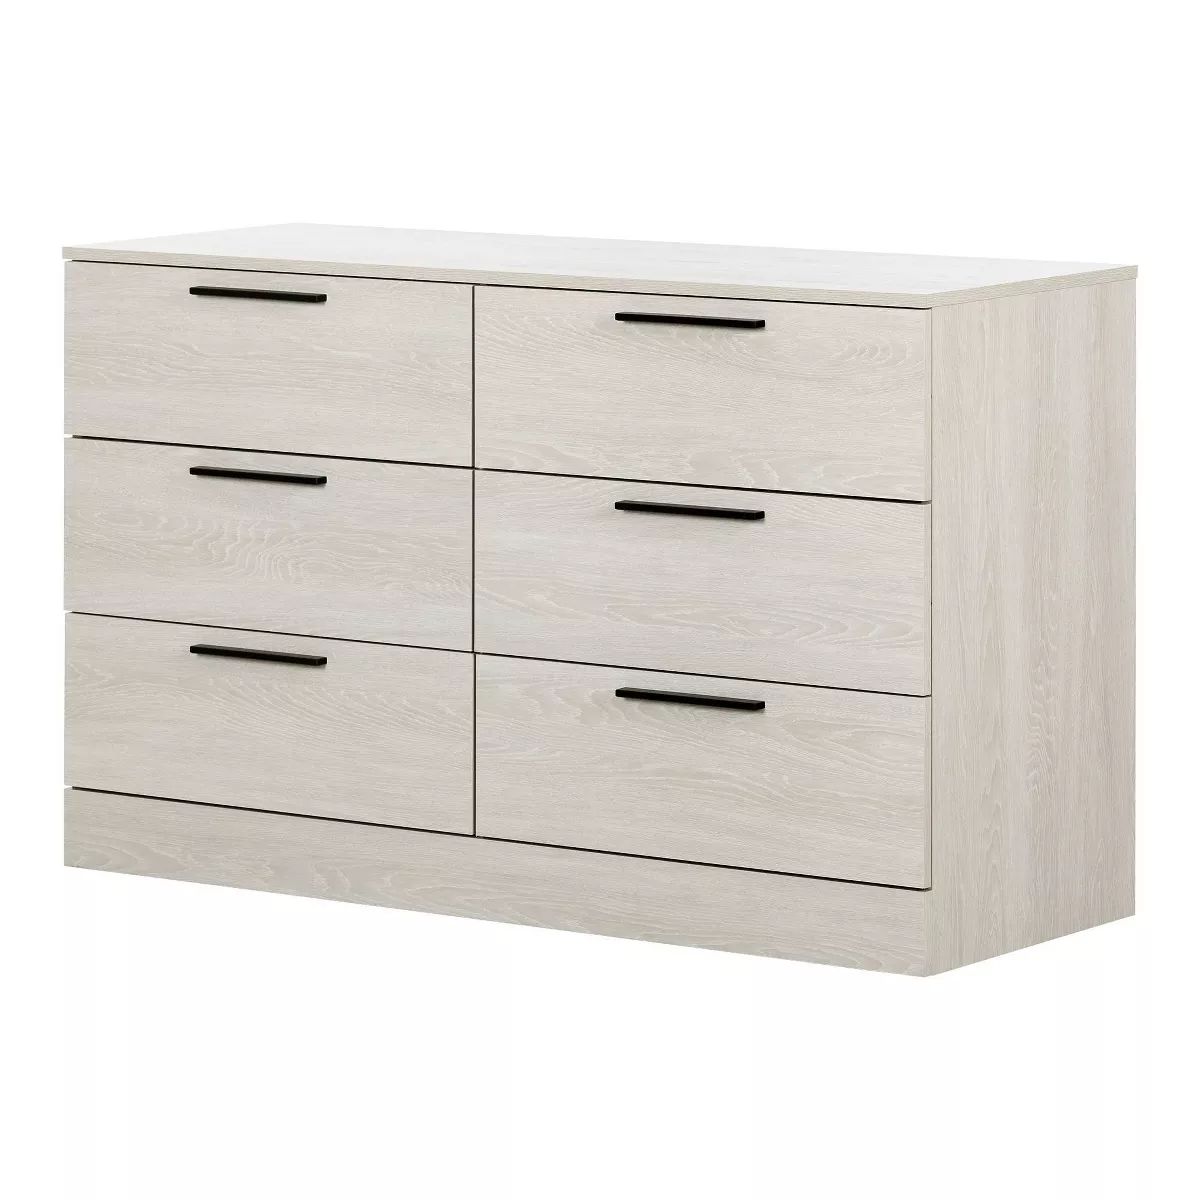 Step One Essential 6 Drawer Double Dresser - South Shore | Target